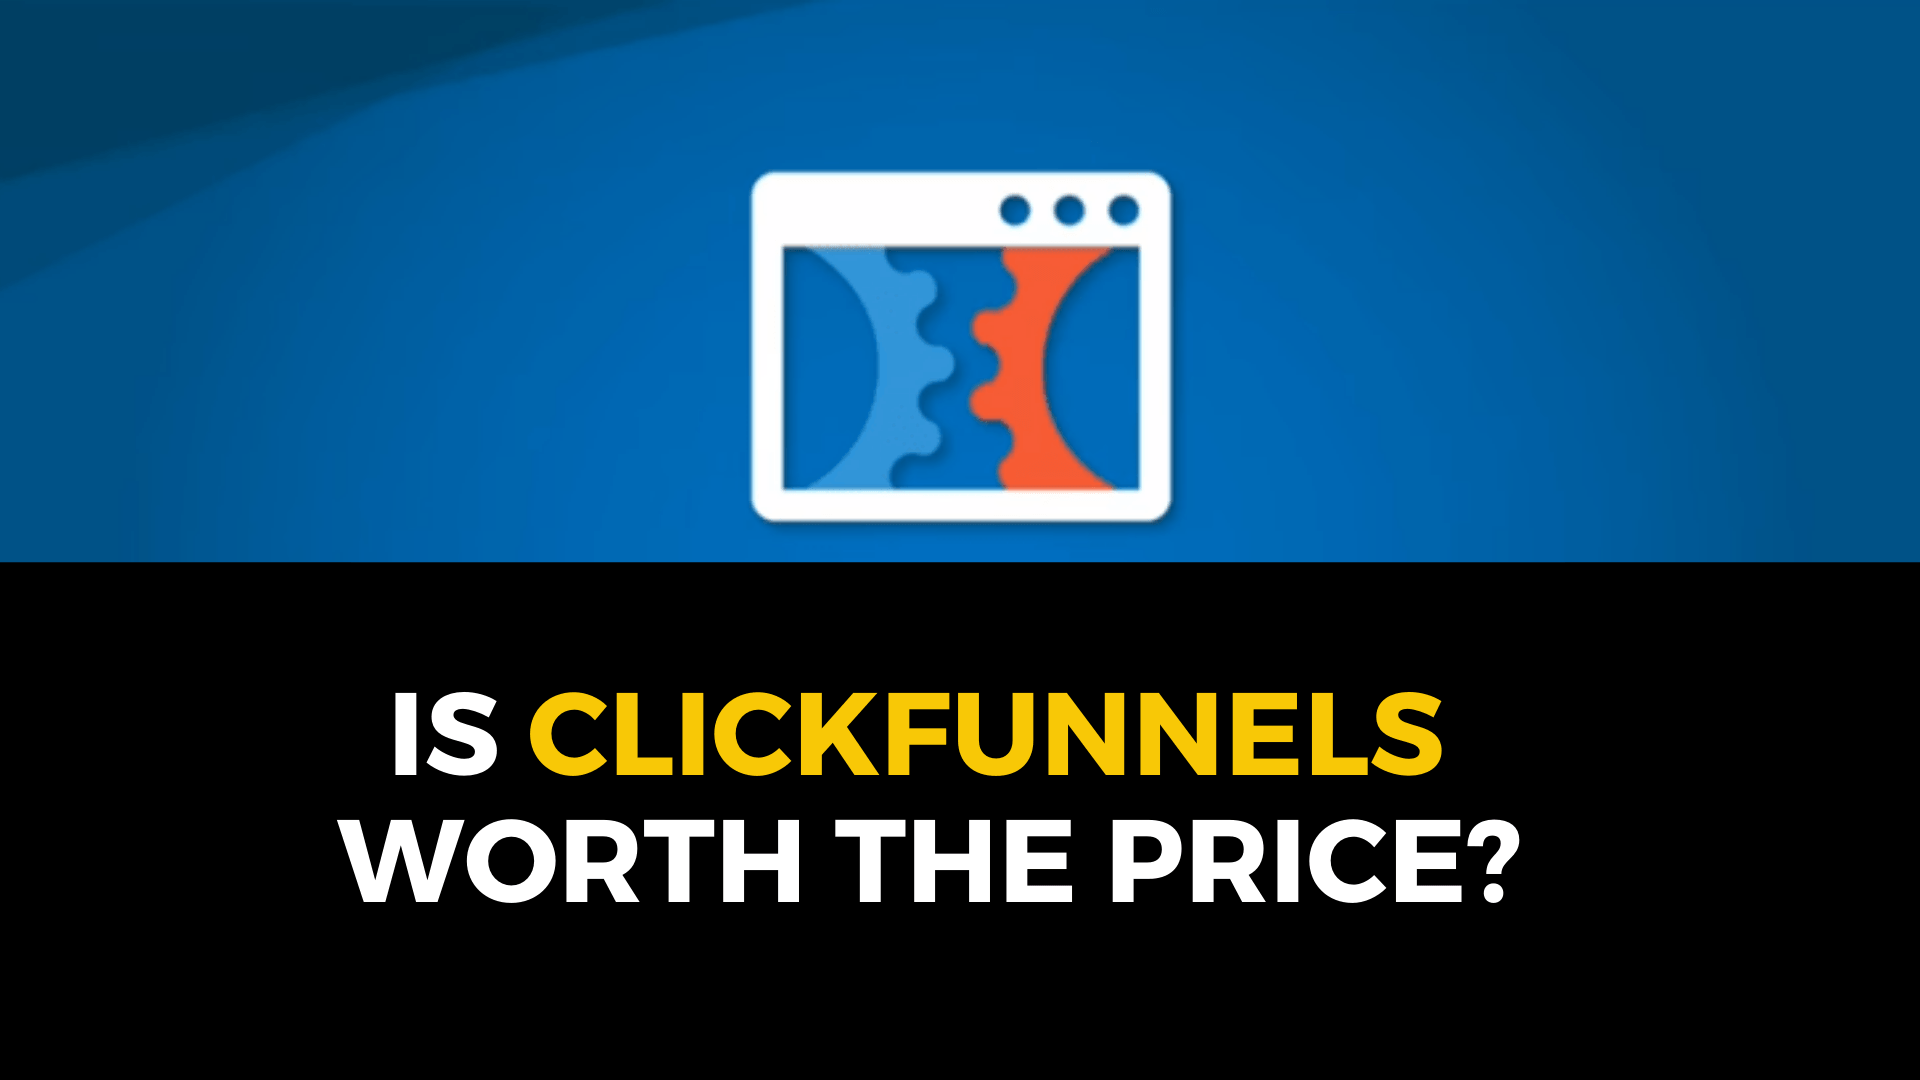 Is ClickFunnel worth the Price?